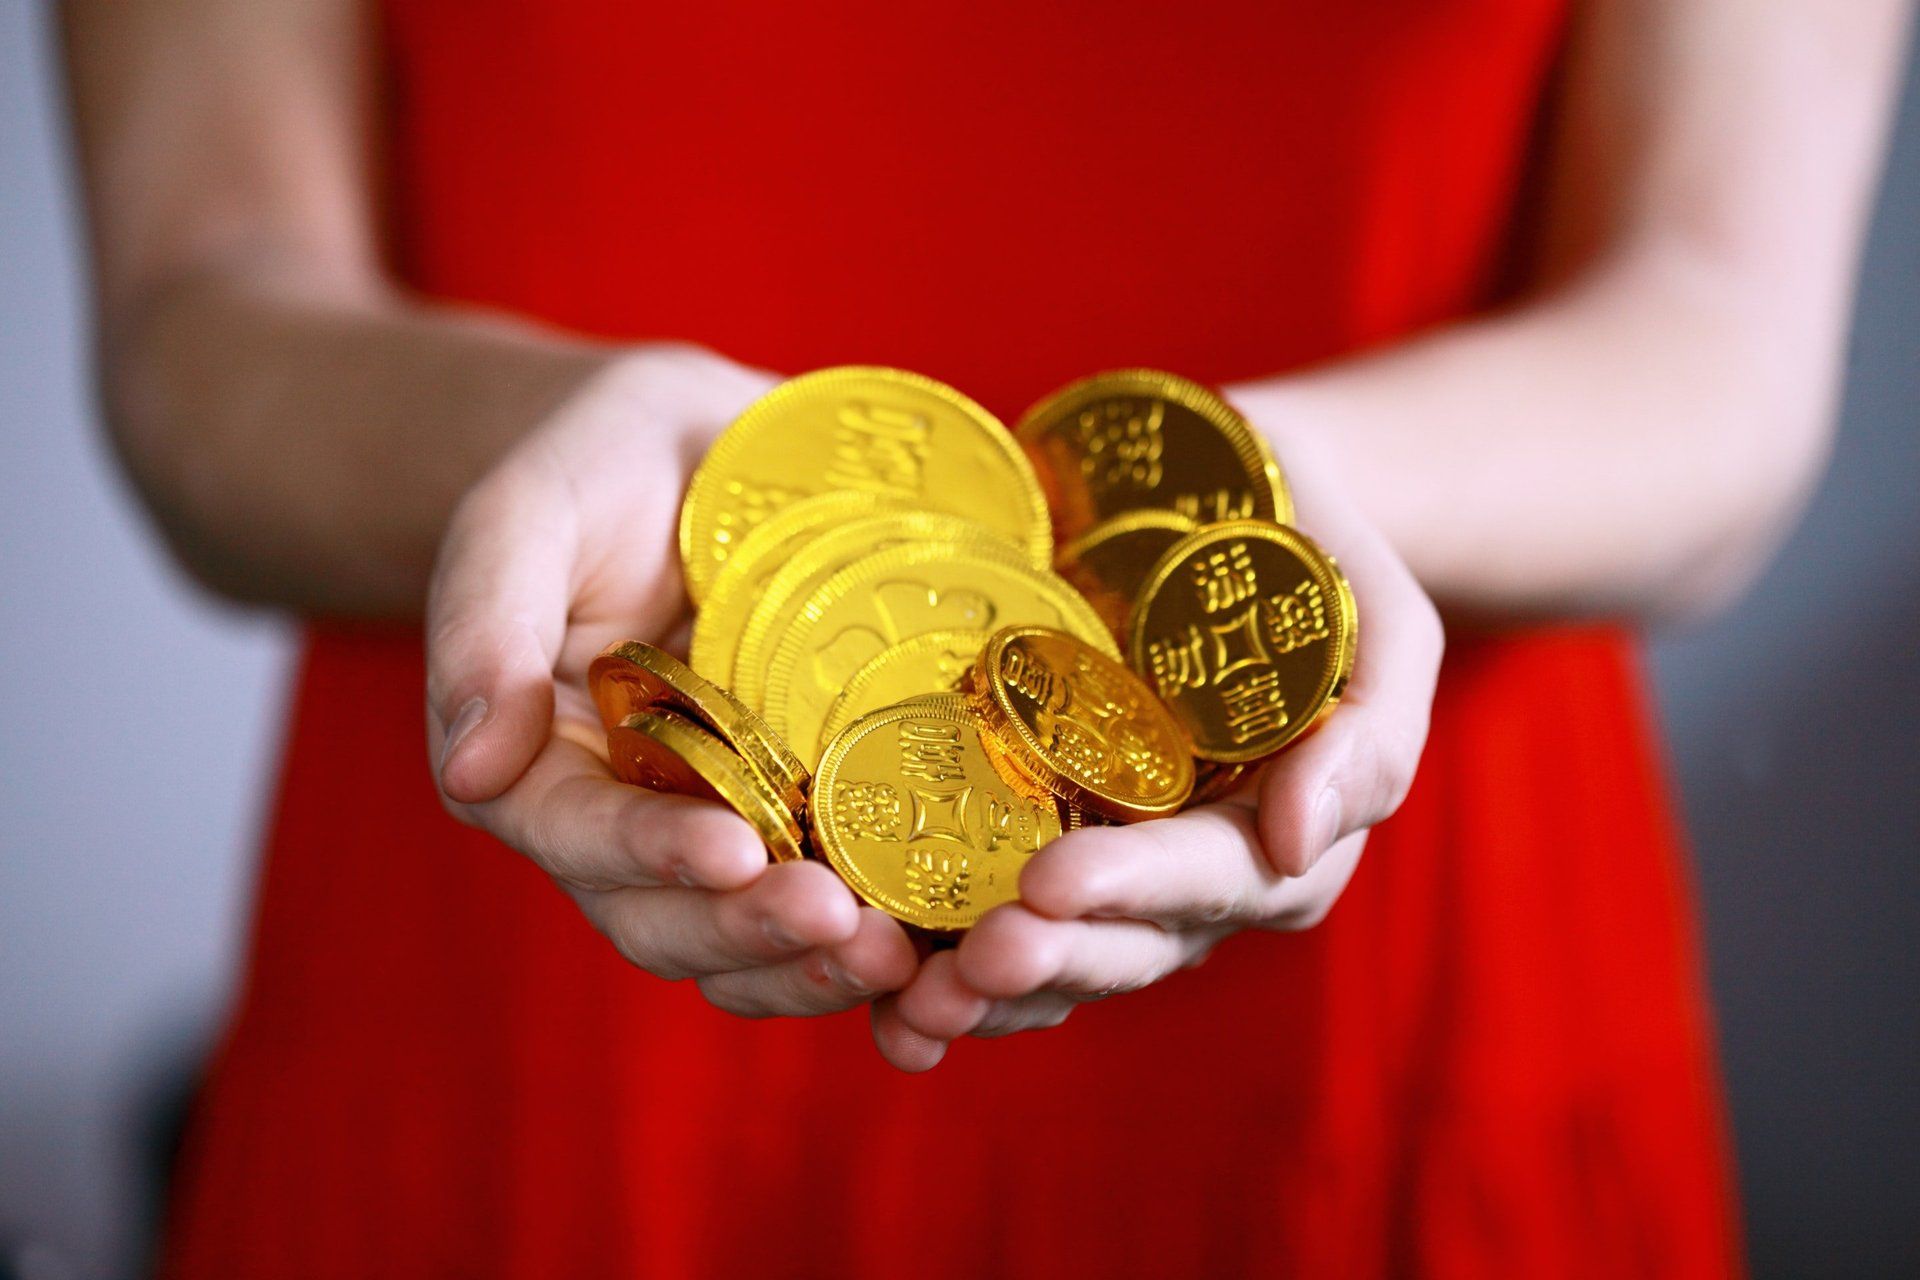 Holding gold coins